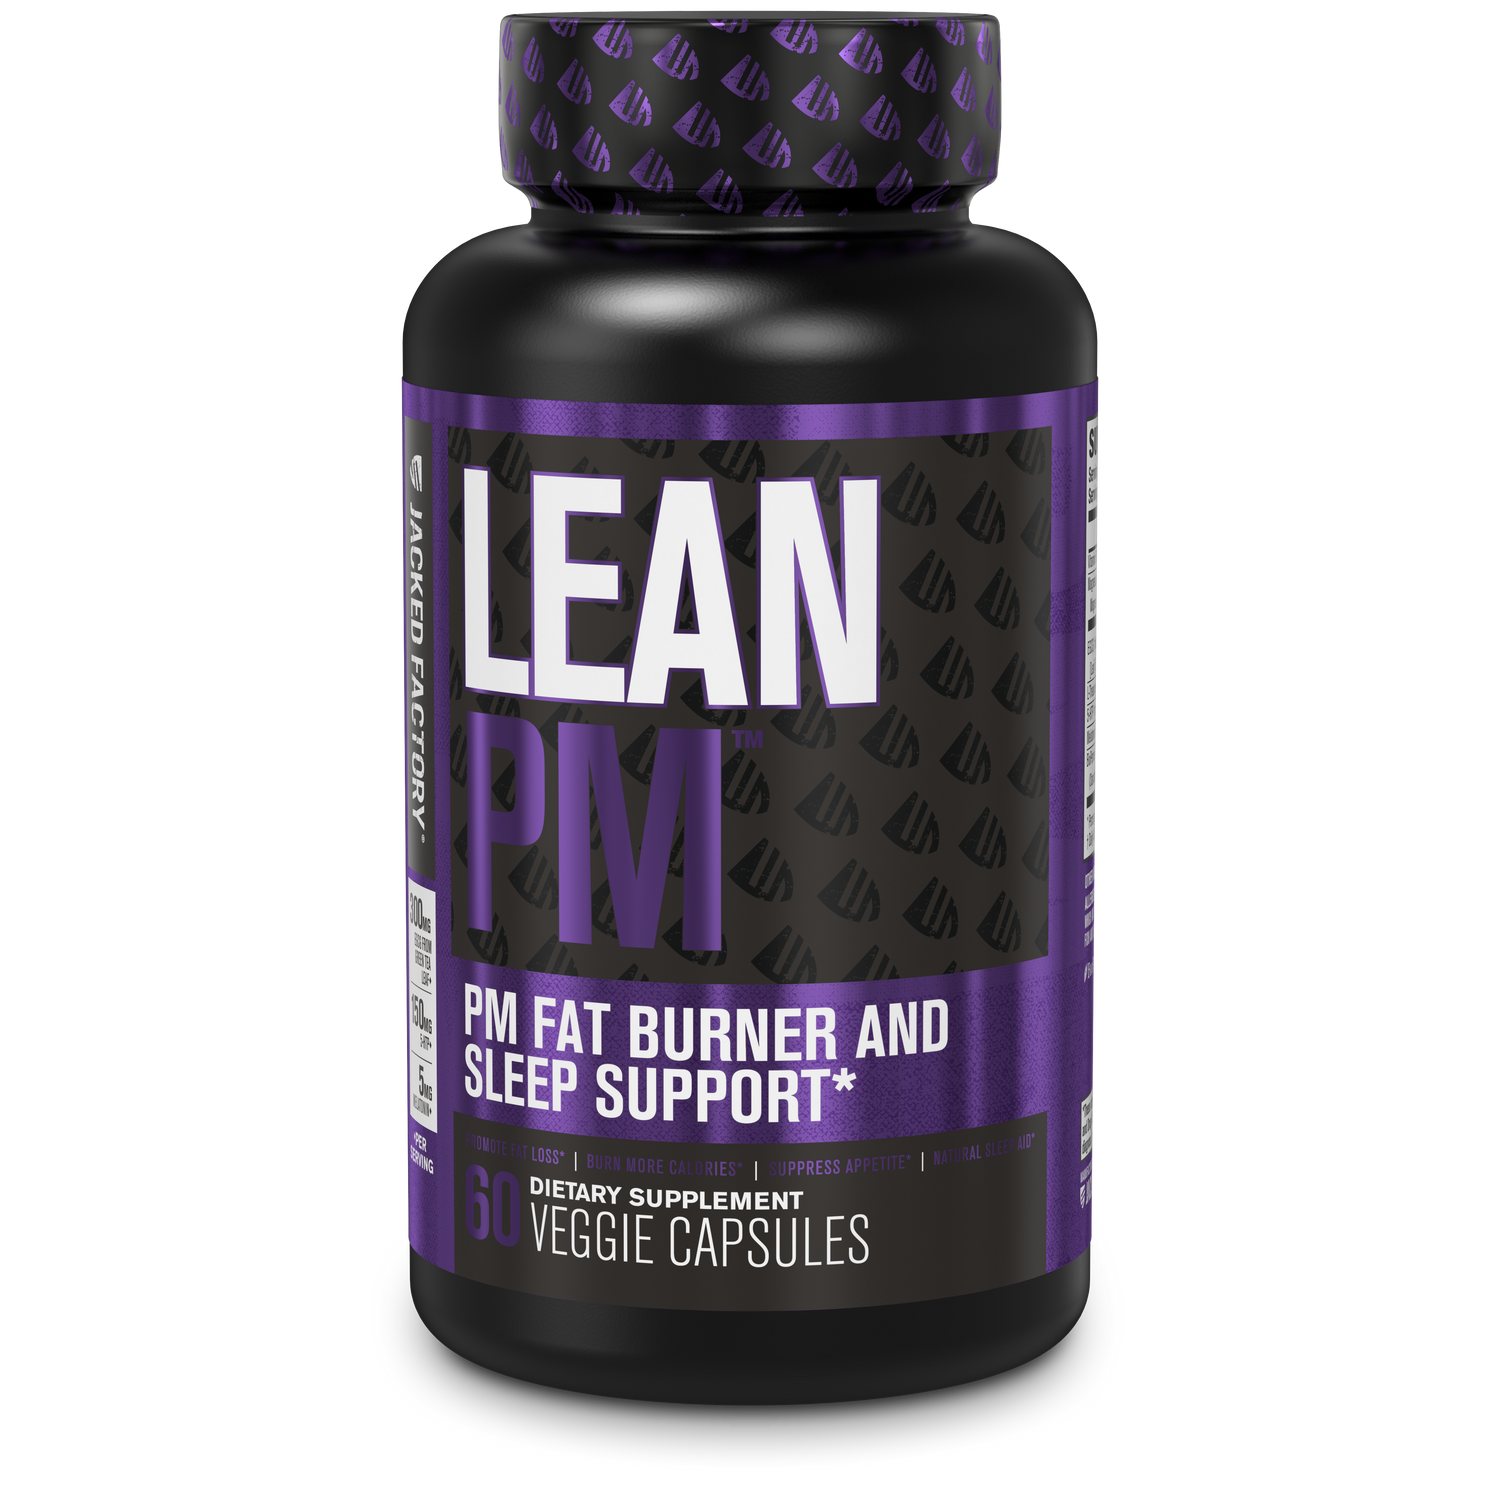 Jacked Factory's LEAN PM Night Time Fat Burner & Sleep Aid (60 veggie capsules) in a black bottle with purple label